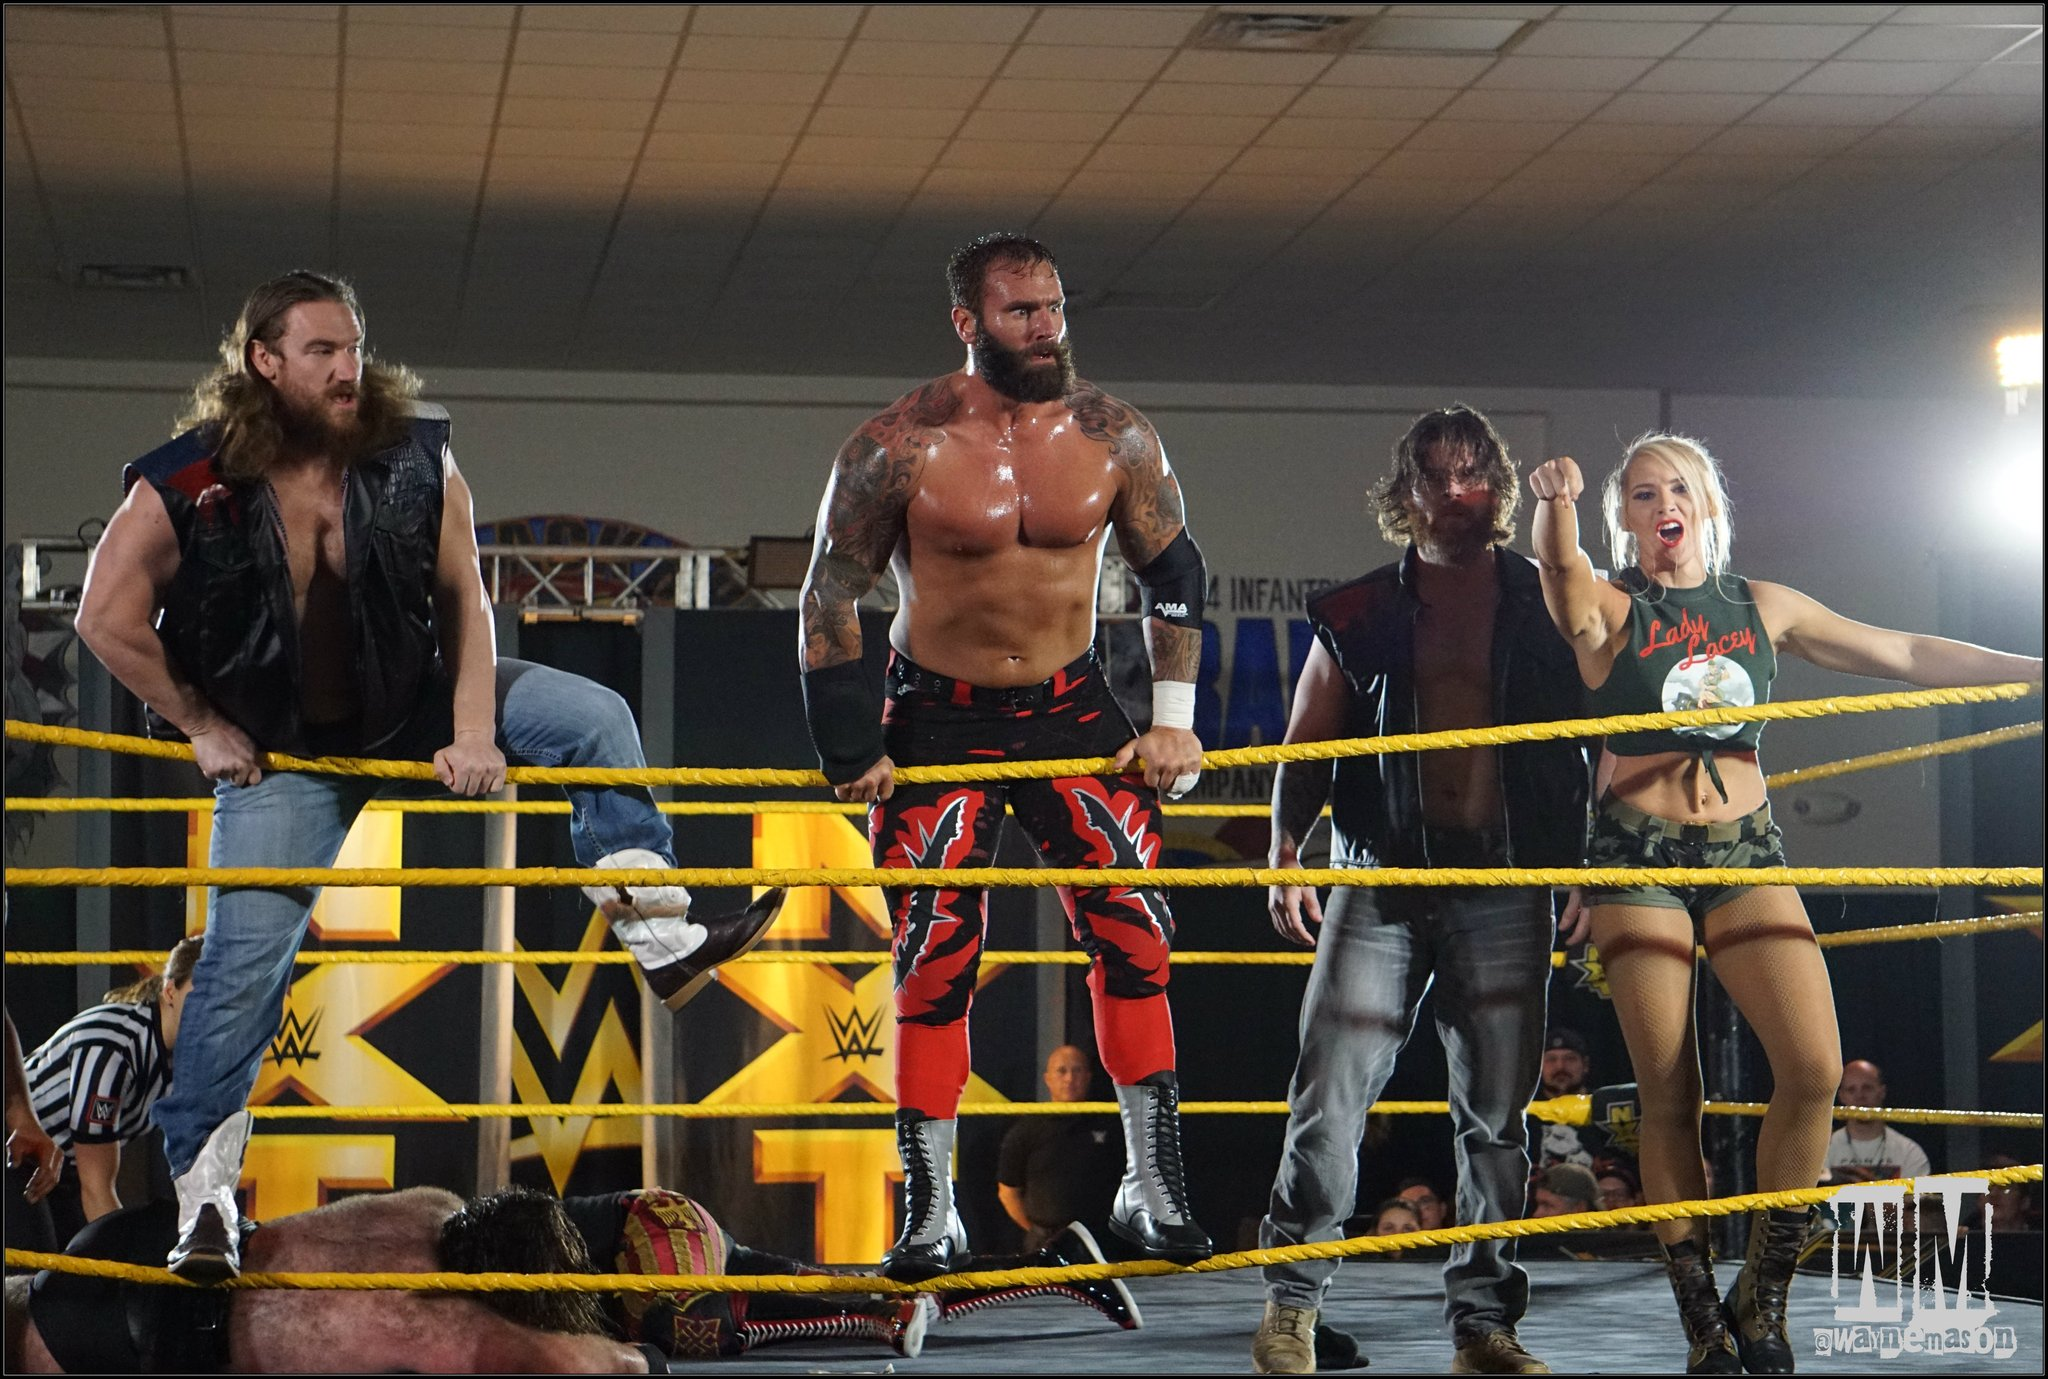 New Stable Debuts Last Night At NXT Live Event2048 x 1379